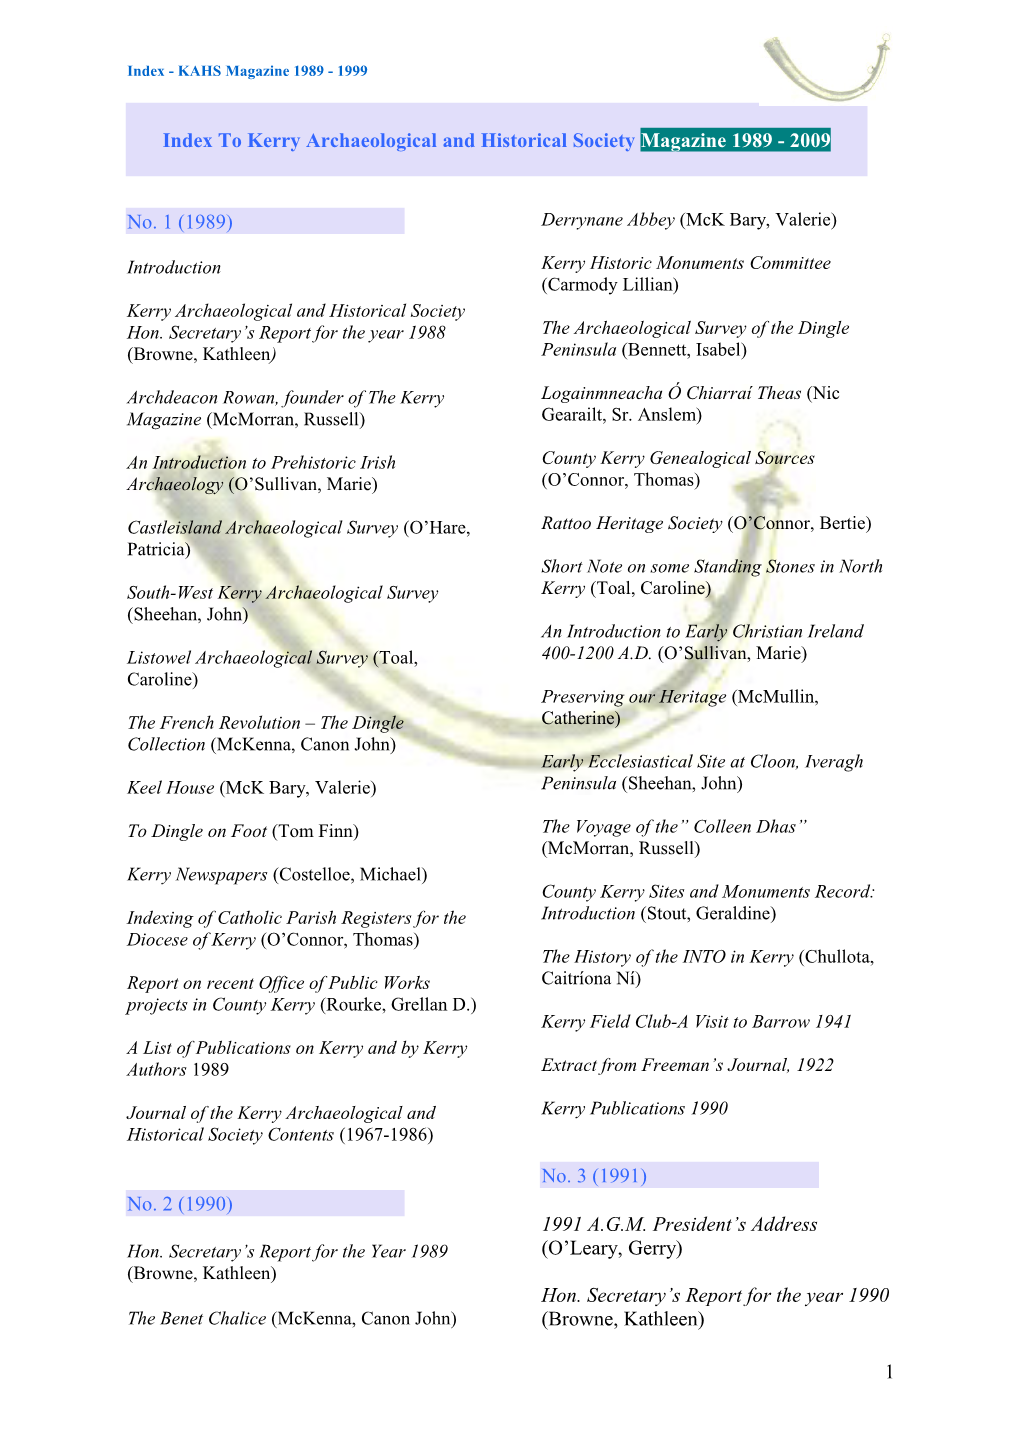 Index to Kerry Archaeological and Historical Society Journals